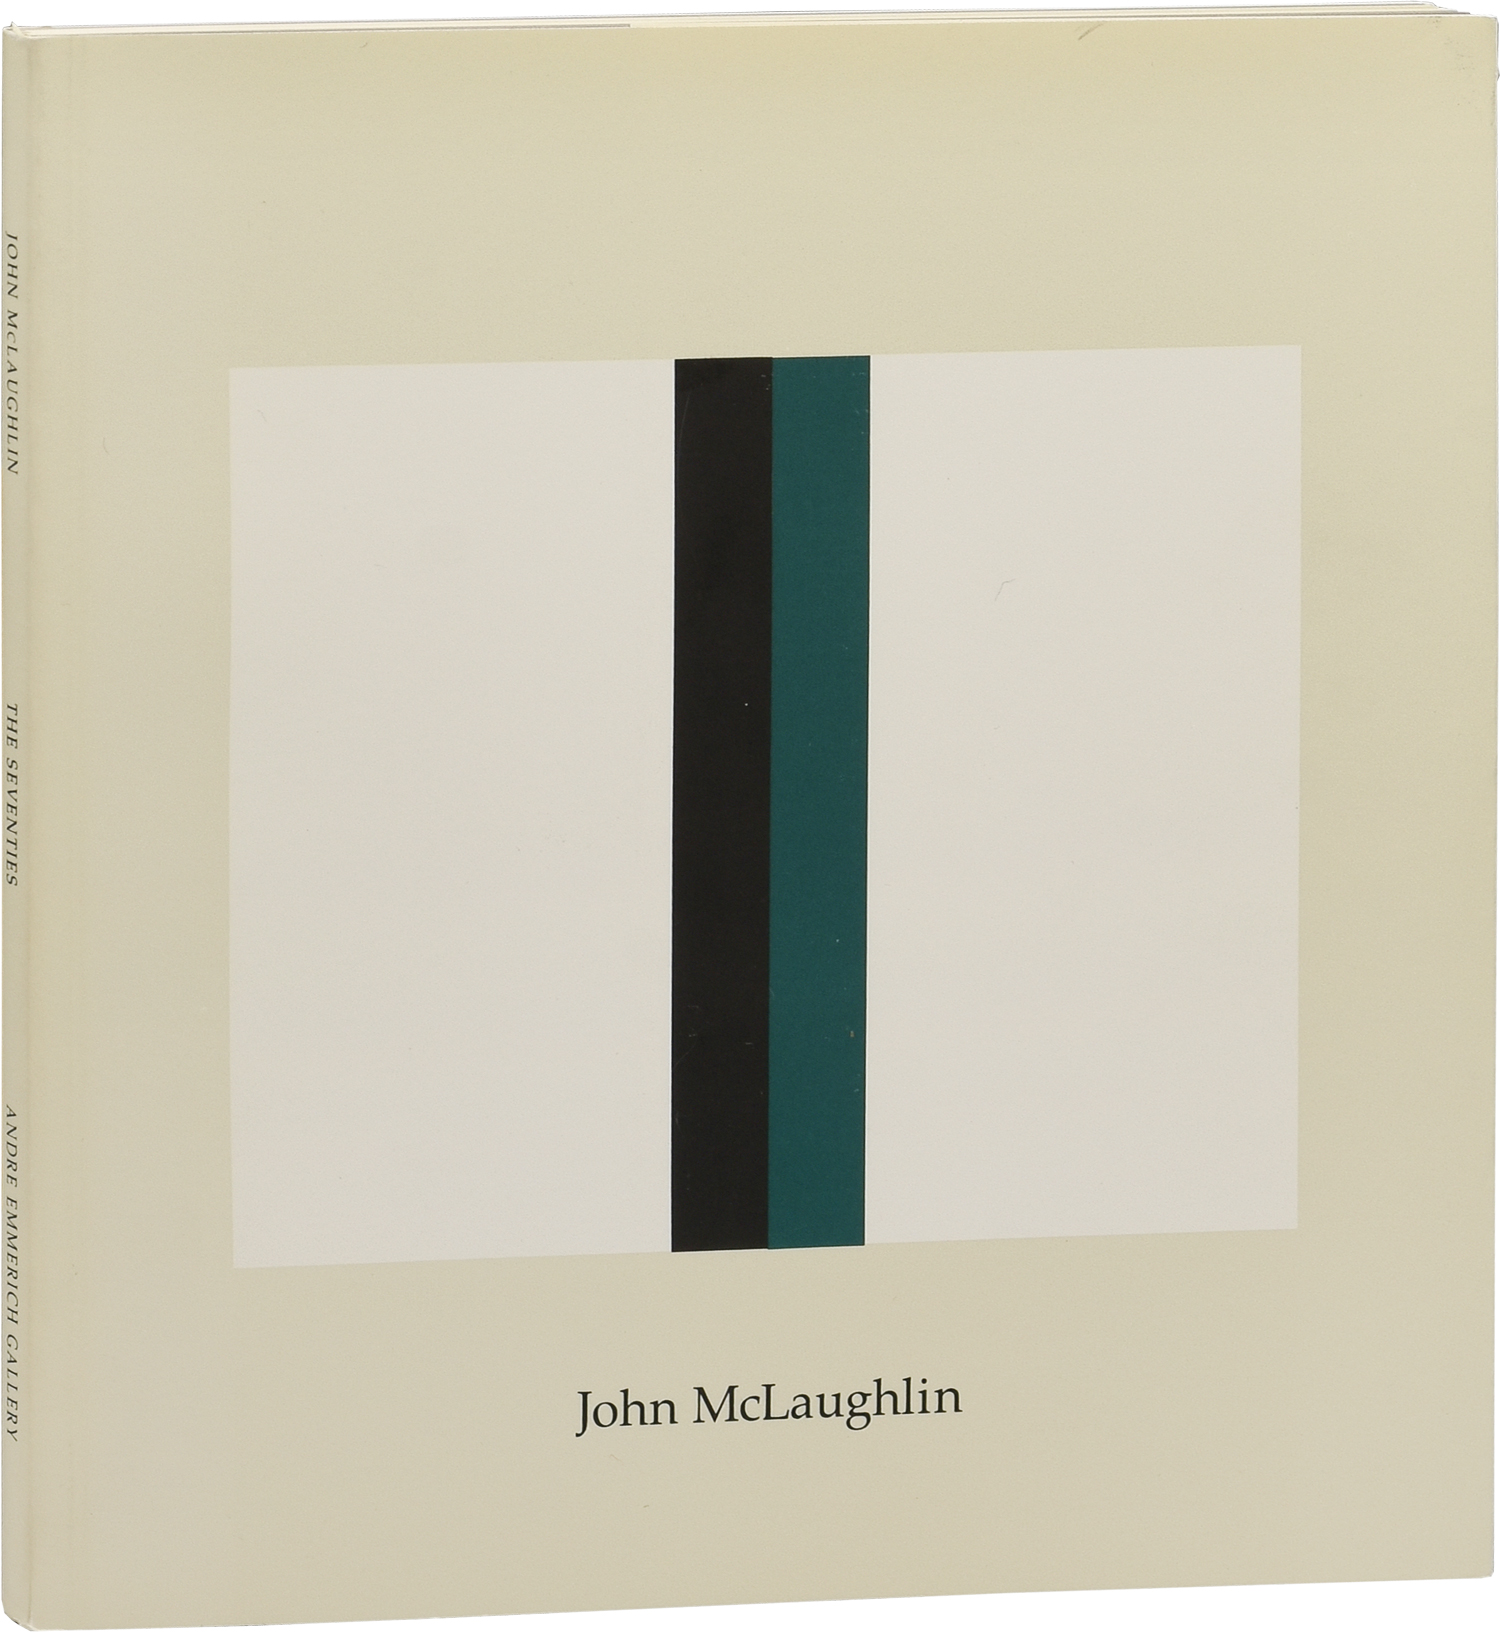 John McLaughlin 1898-1976: Paintings of the Seventies (First Edition ...